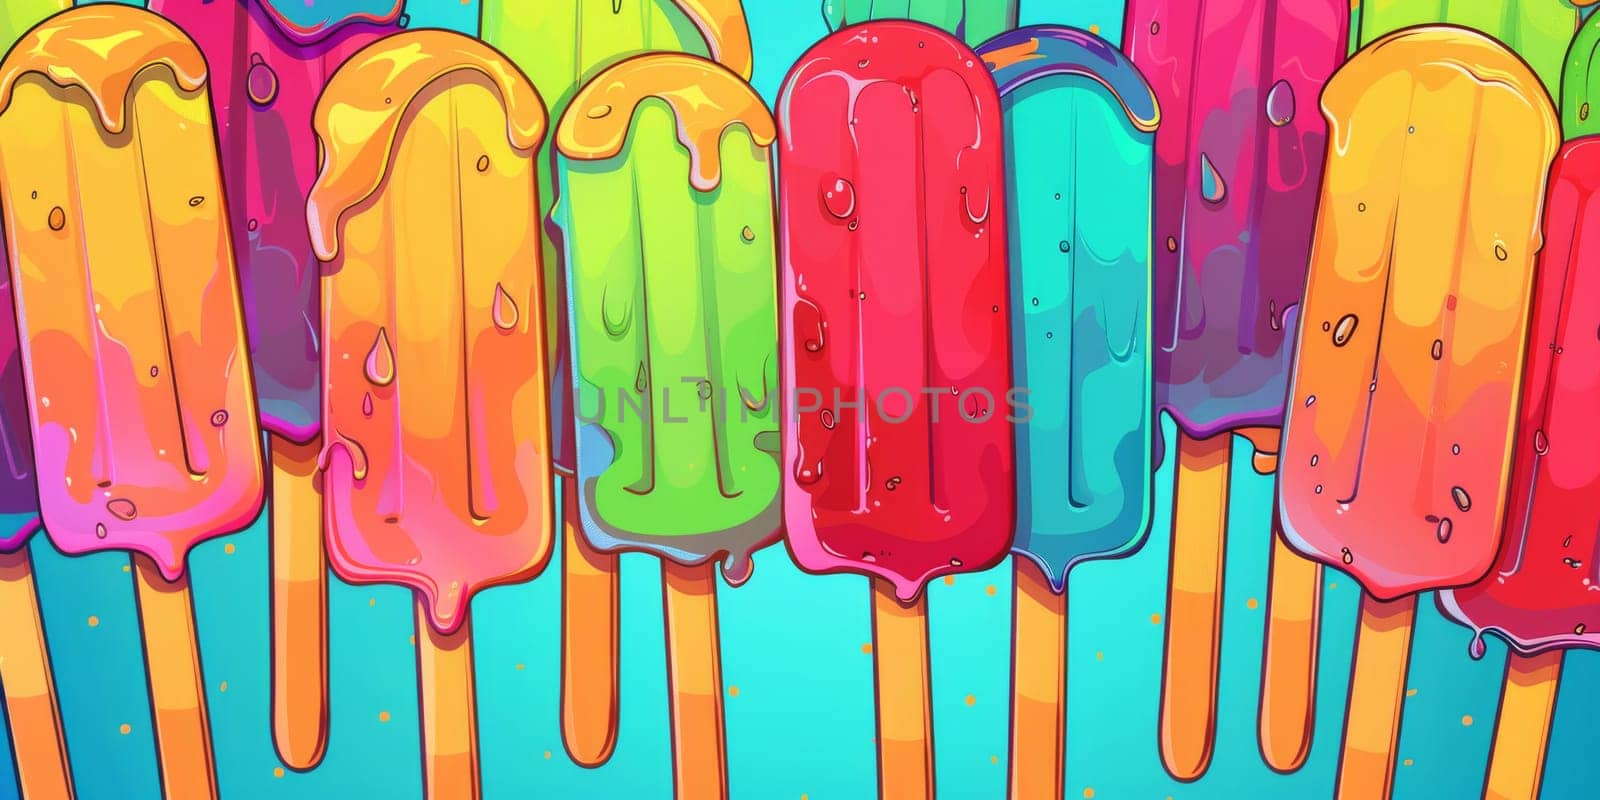 Colorful ice lolly as background or texture by Kadula